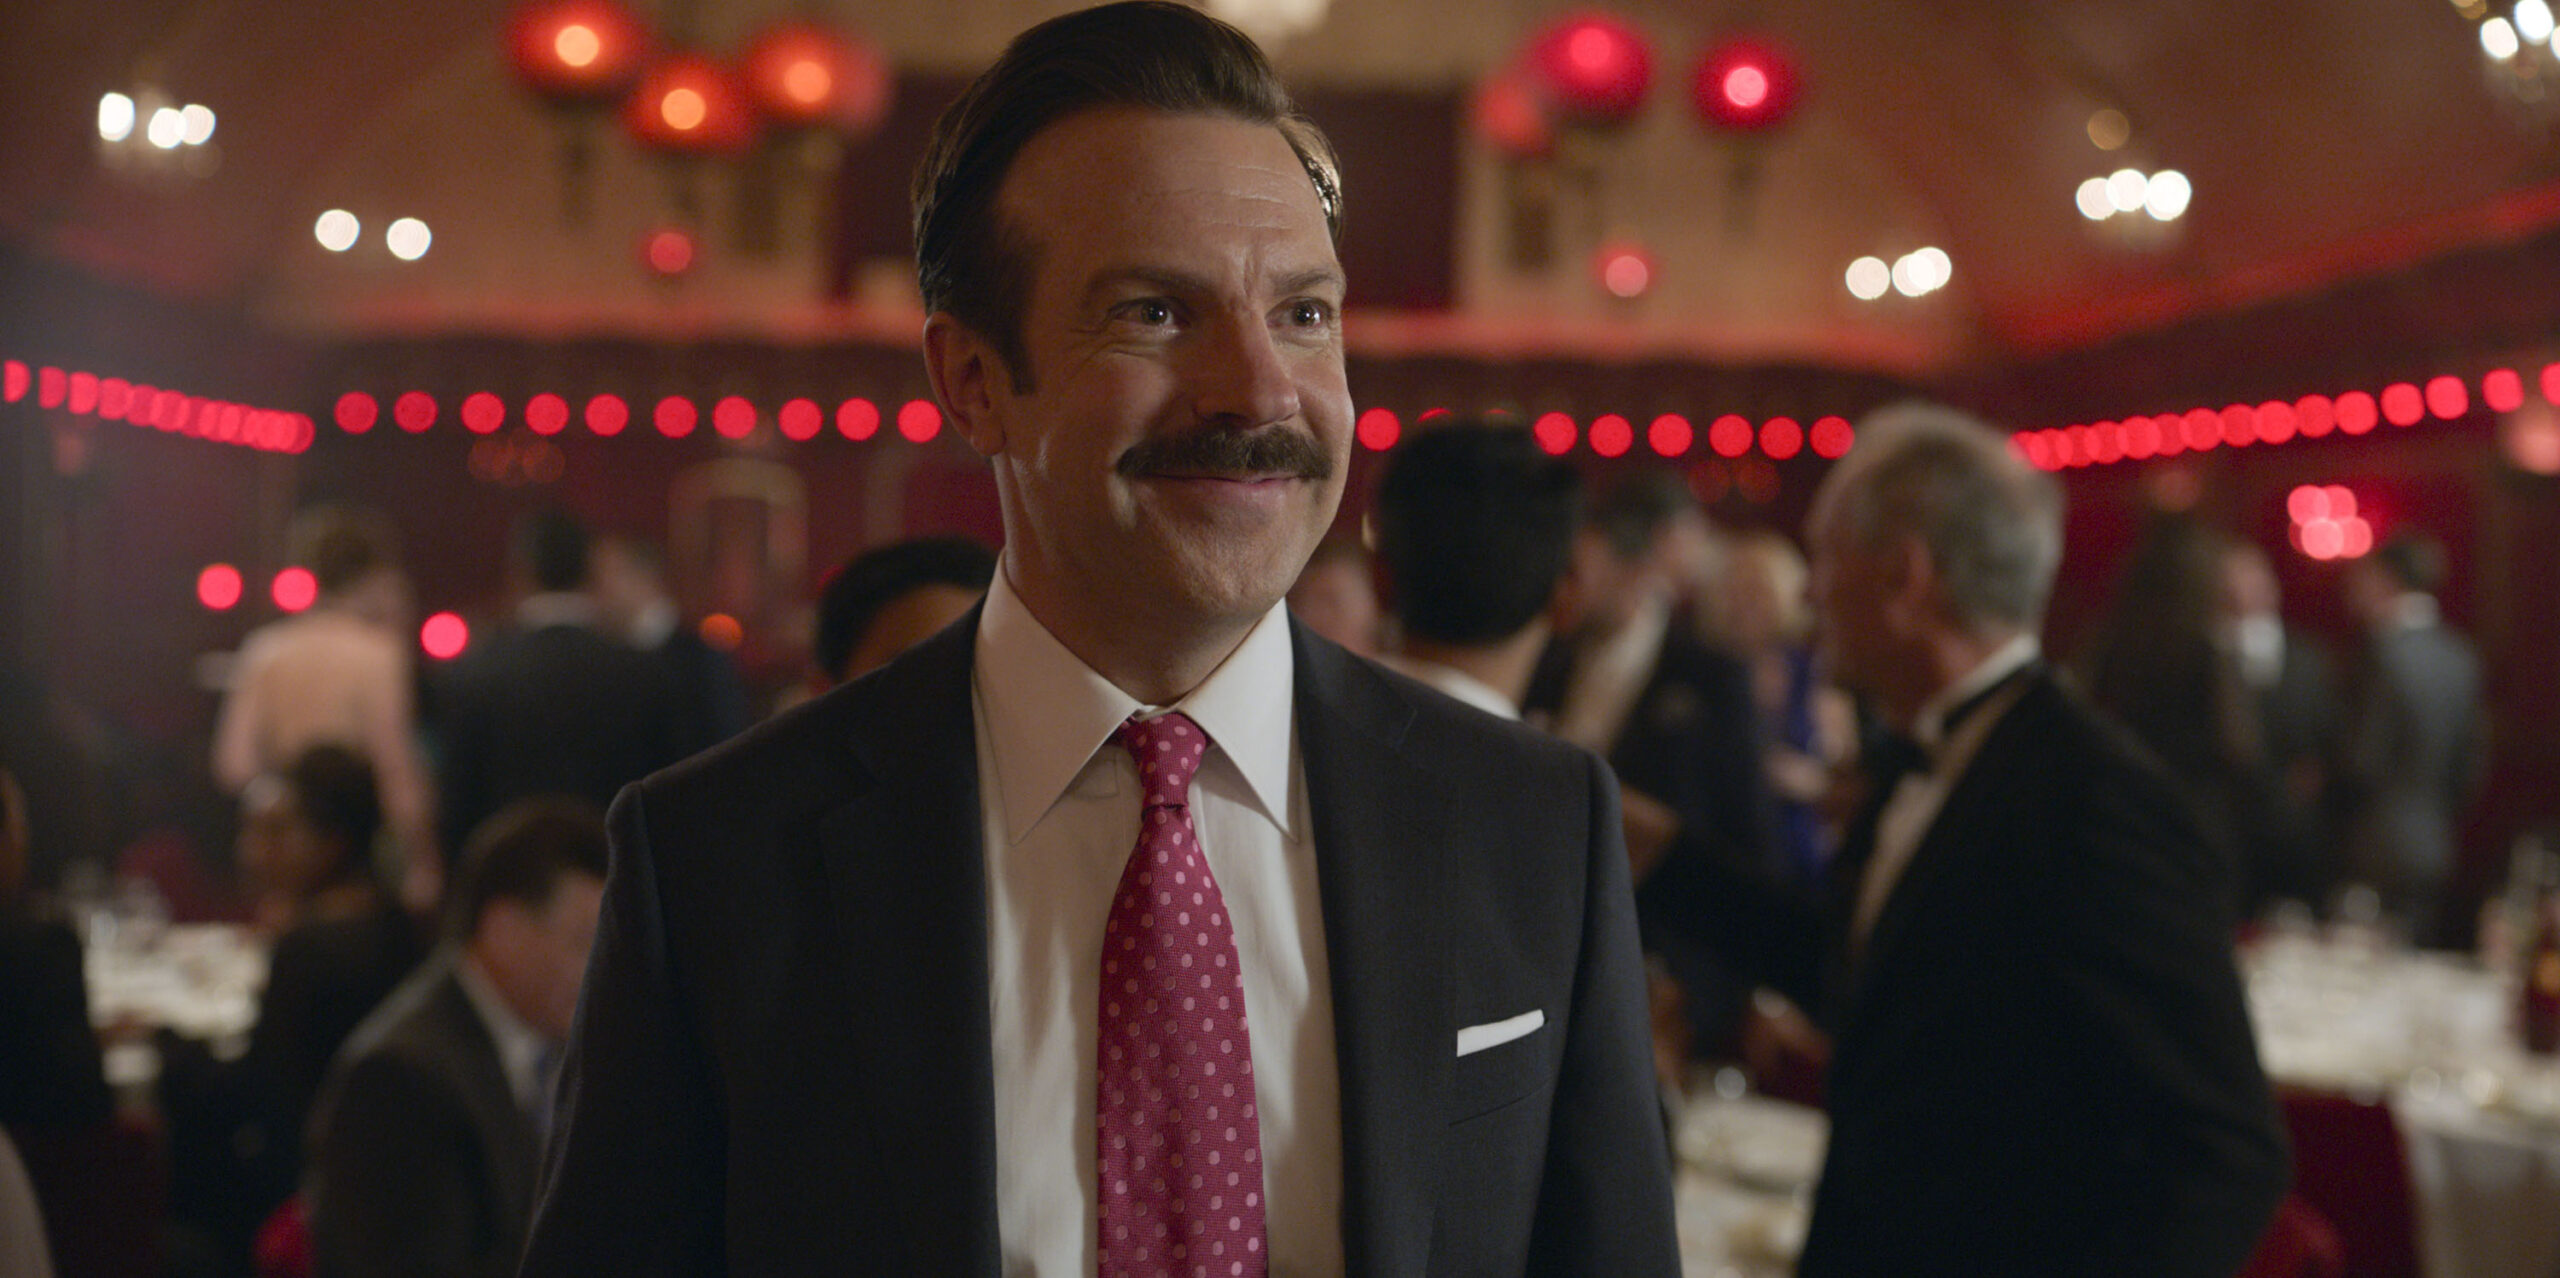 Jason Sudeikis in Ted Lasso 1x04 'For the Children' [tag: Jason Sudeikis] [credit: courtesy of Apple TV Plus]